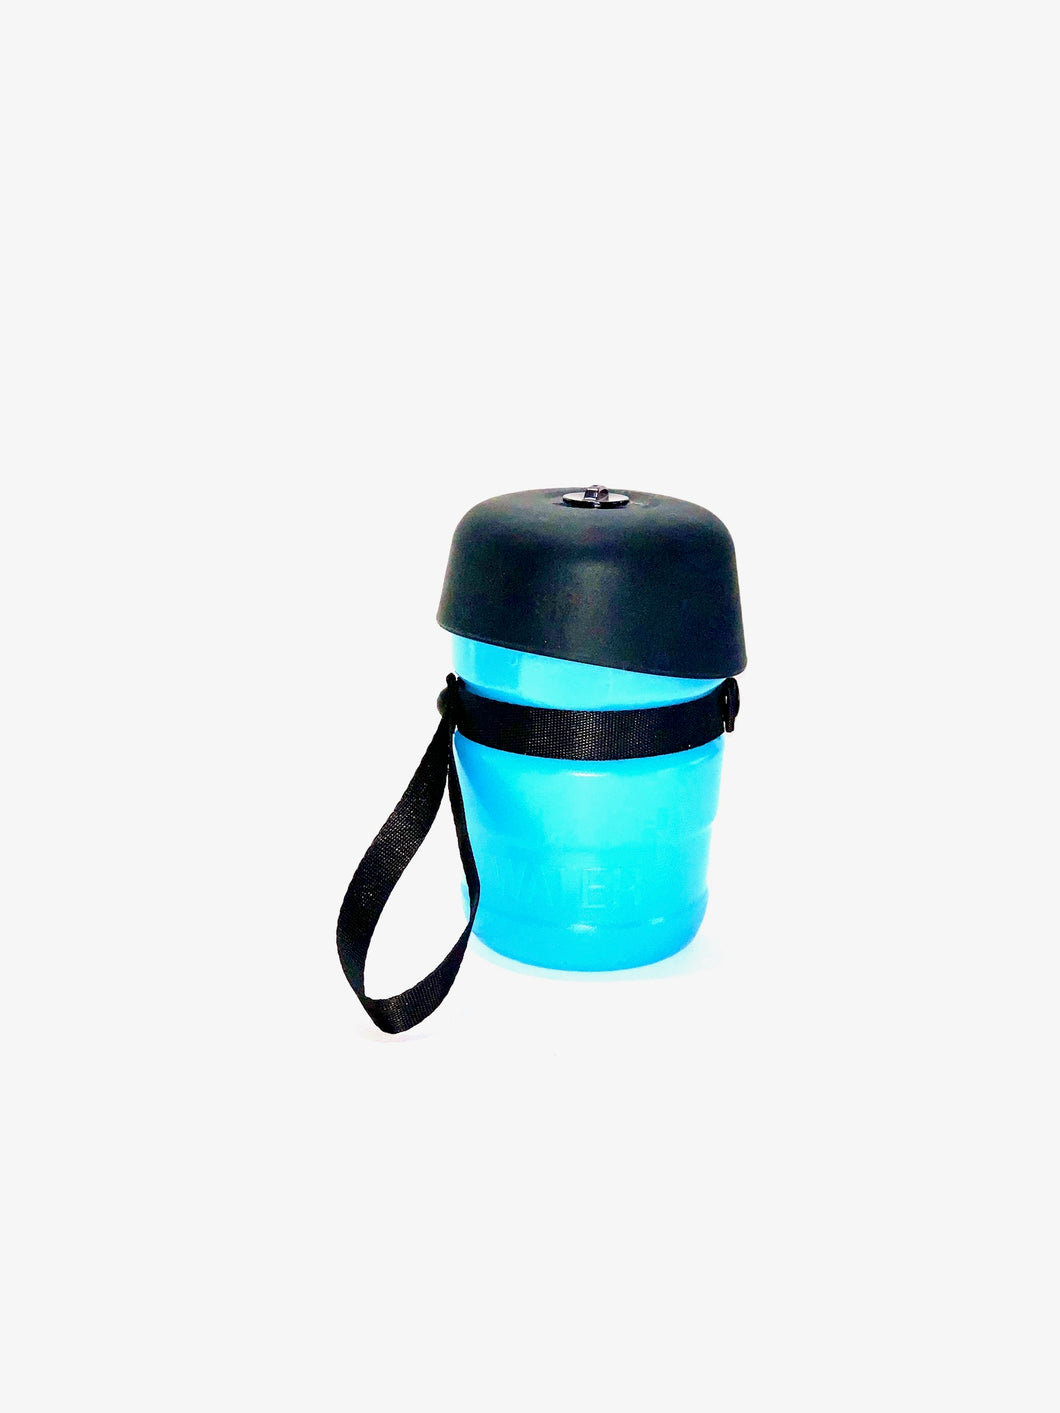 Foldable Travel Water Bottle for Pets